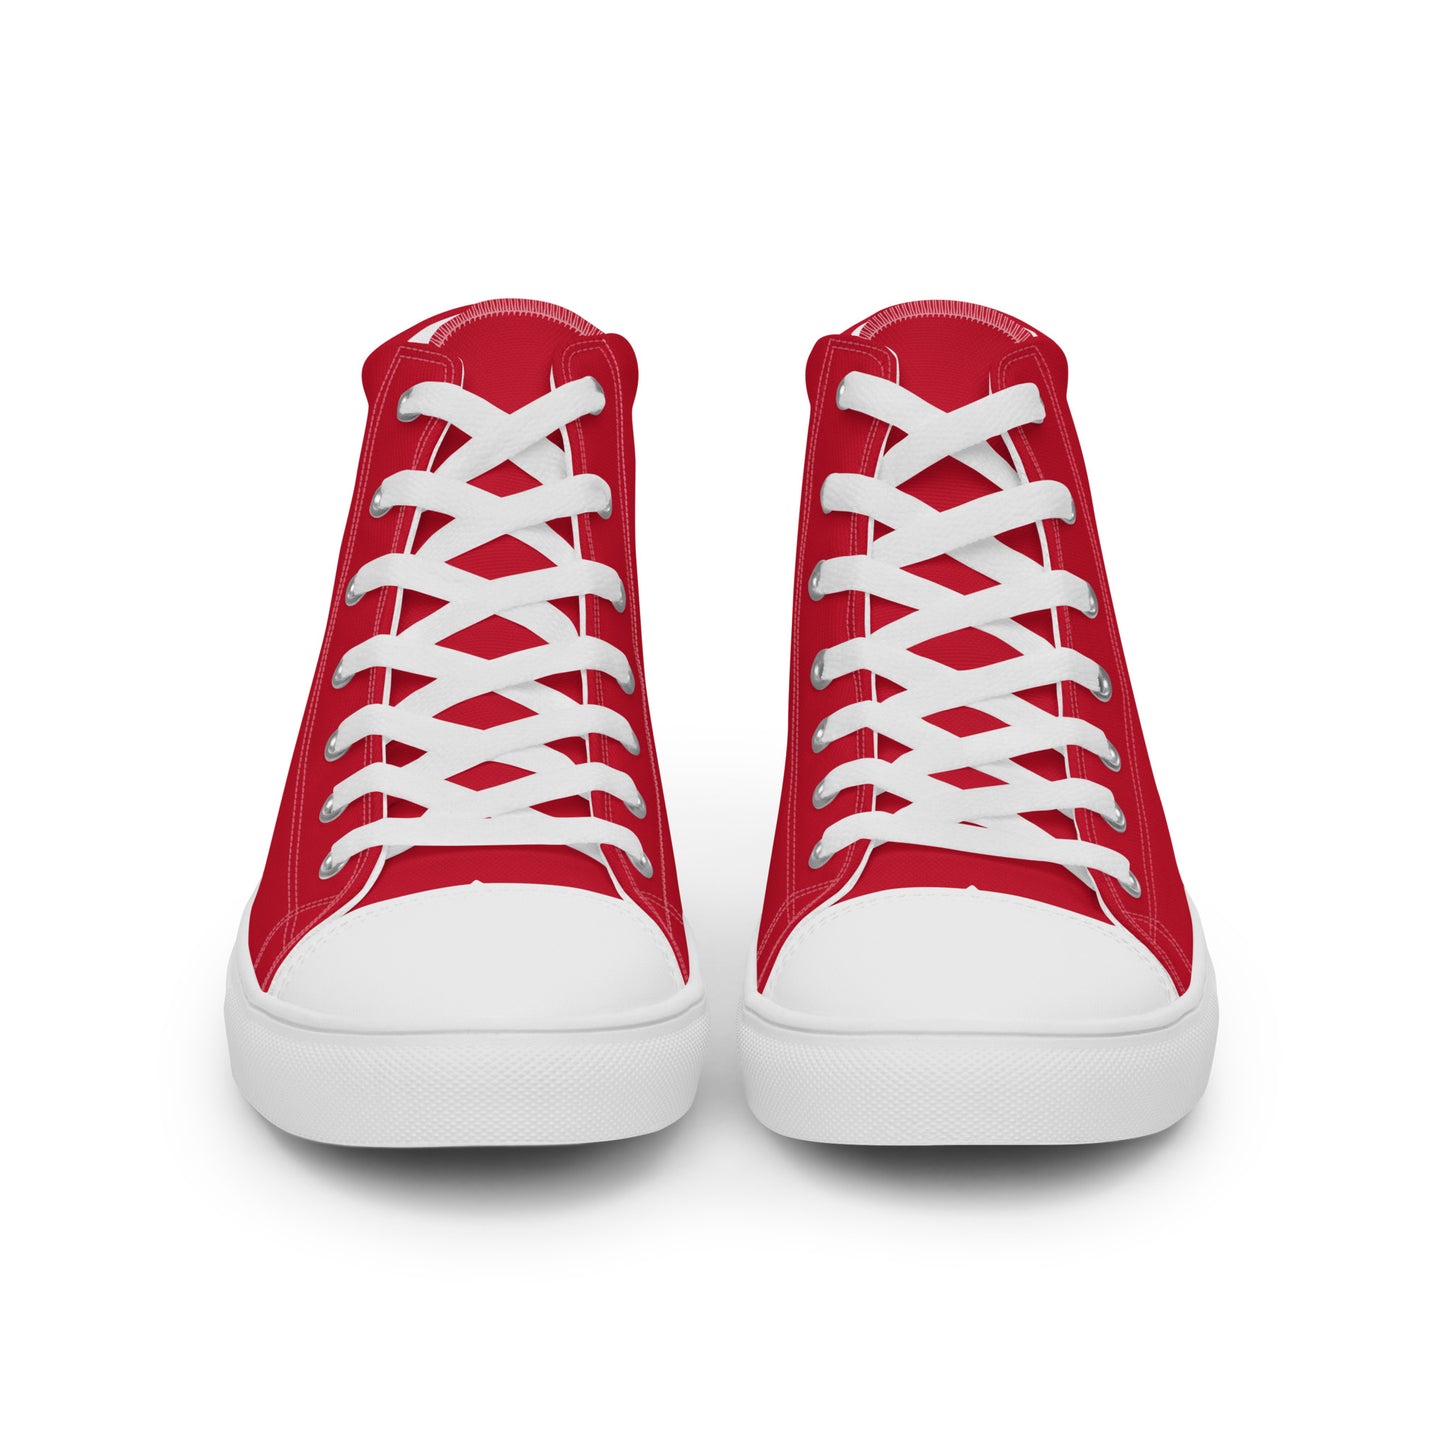 Chile - Women - Red - High top shoes